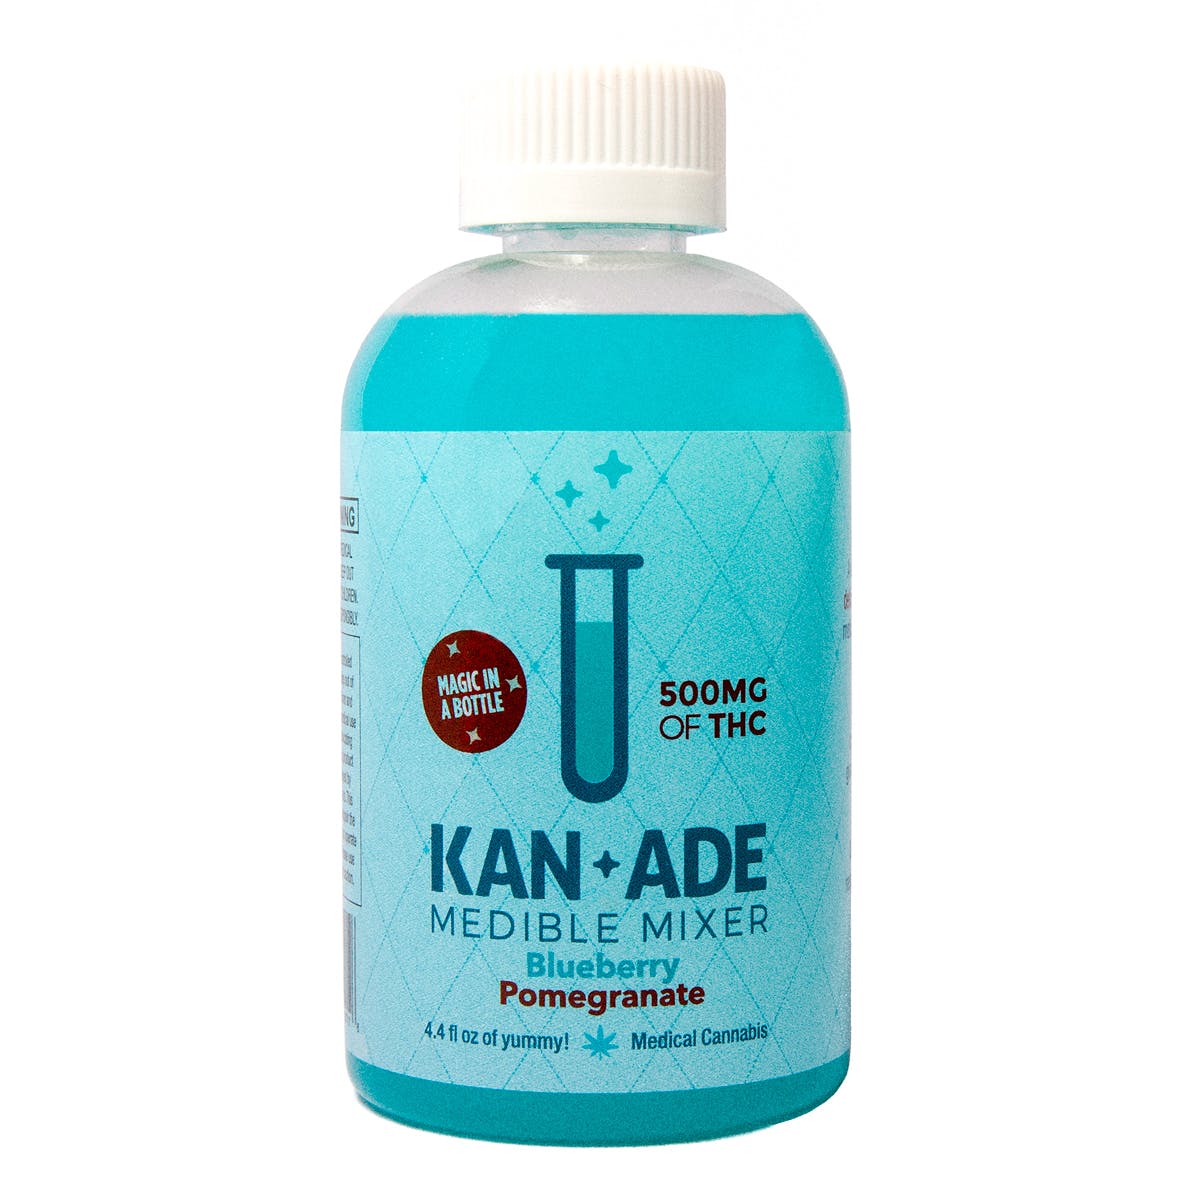 Kan-Ade Blueberry Pomegranate 500mg